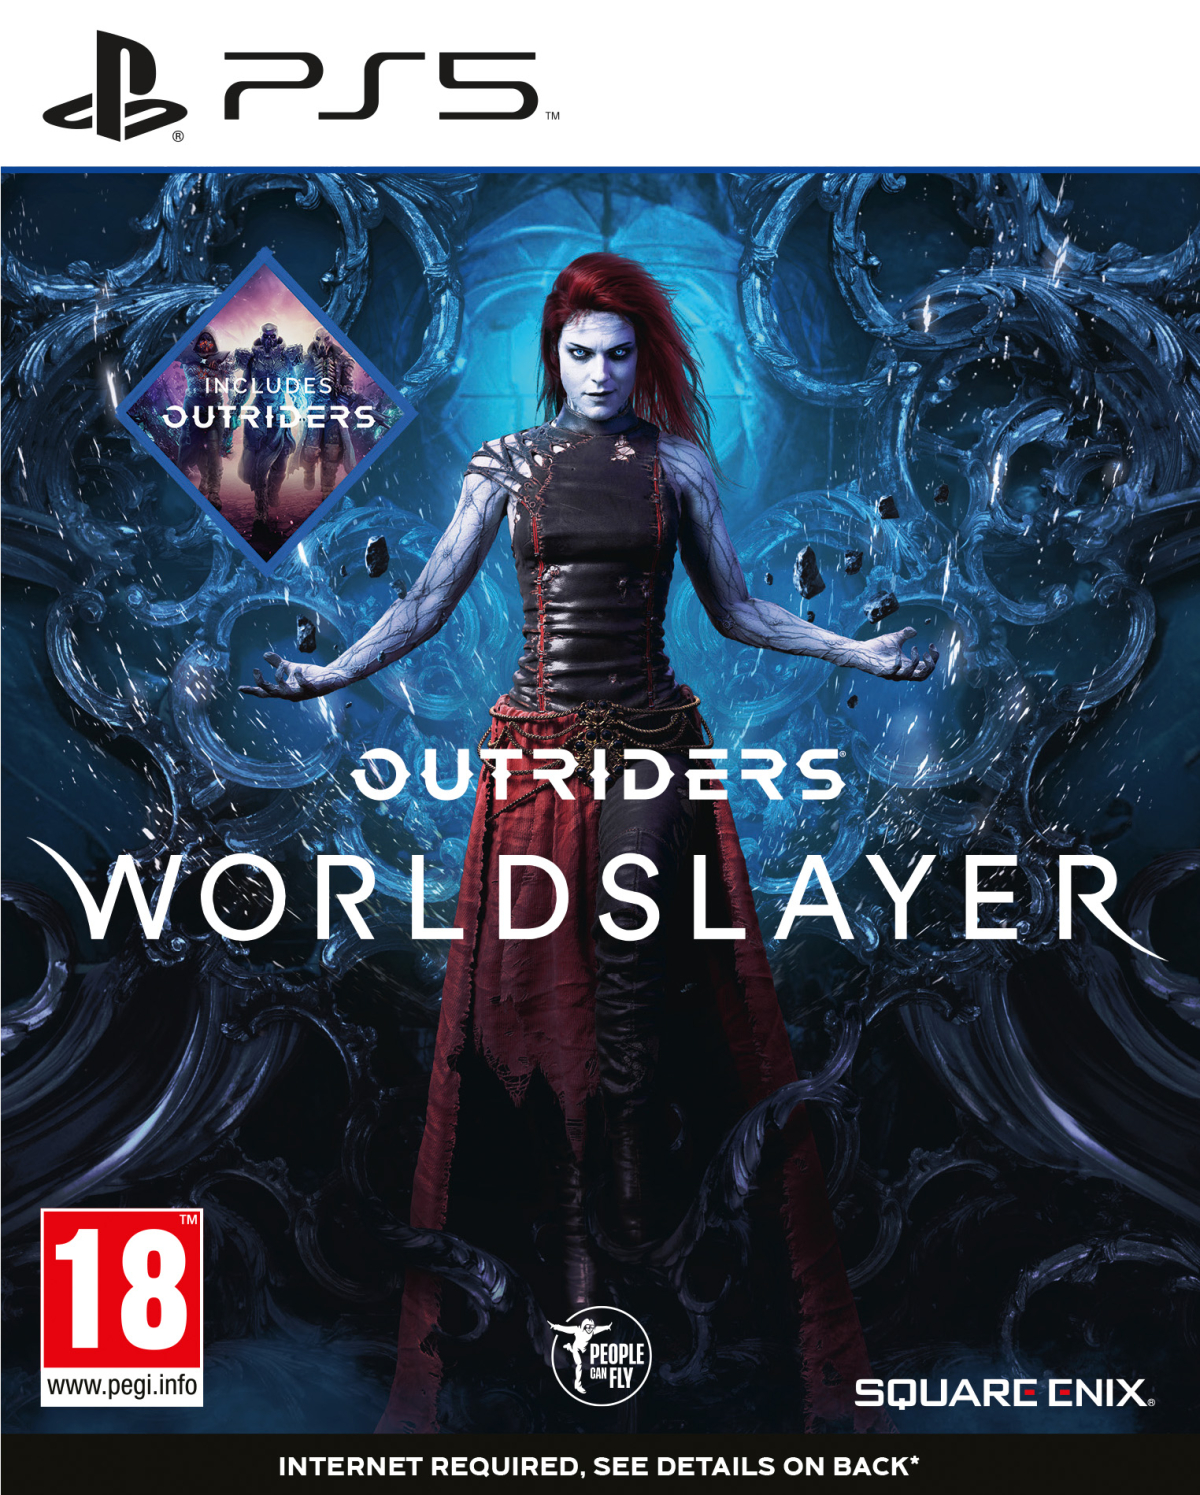 PS5 Outriders Worldslayer